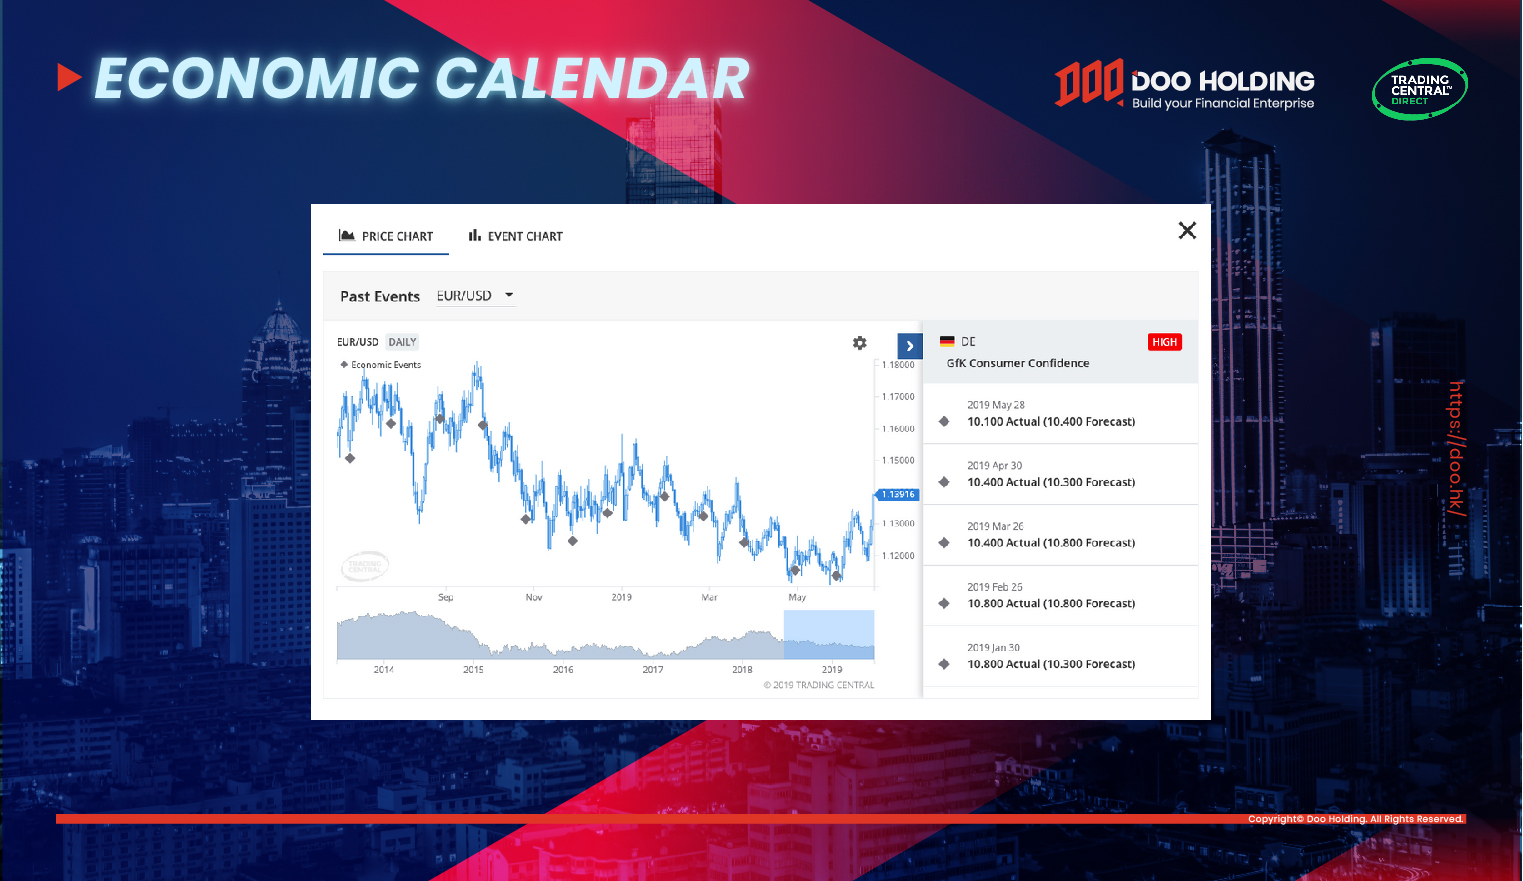 Doo Prime Partners With Trading Central To Bring You Analyst Views, Economic Calendar, and Forex Featured Idea_3 | www.dooprime.com